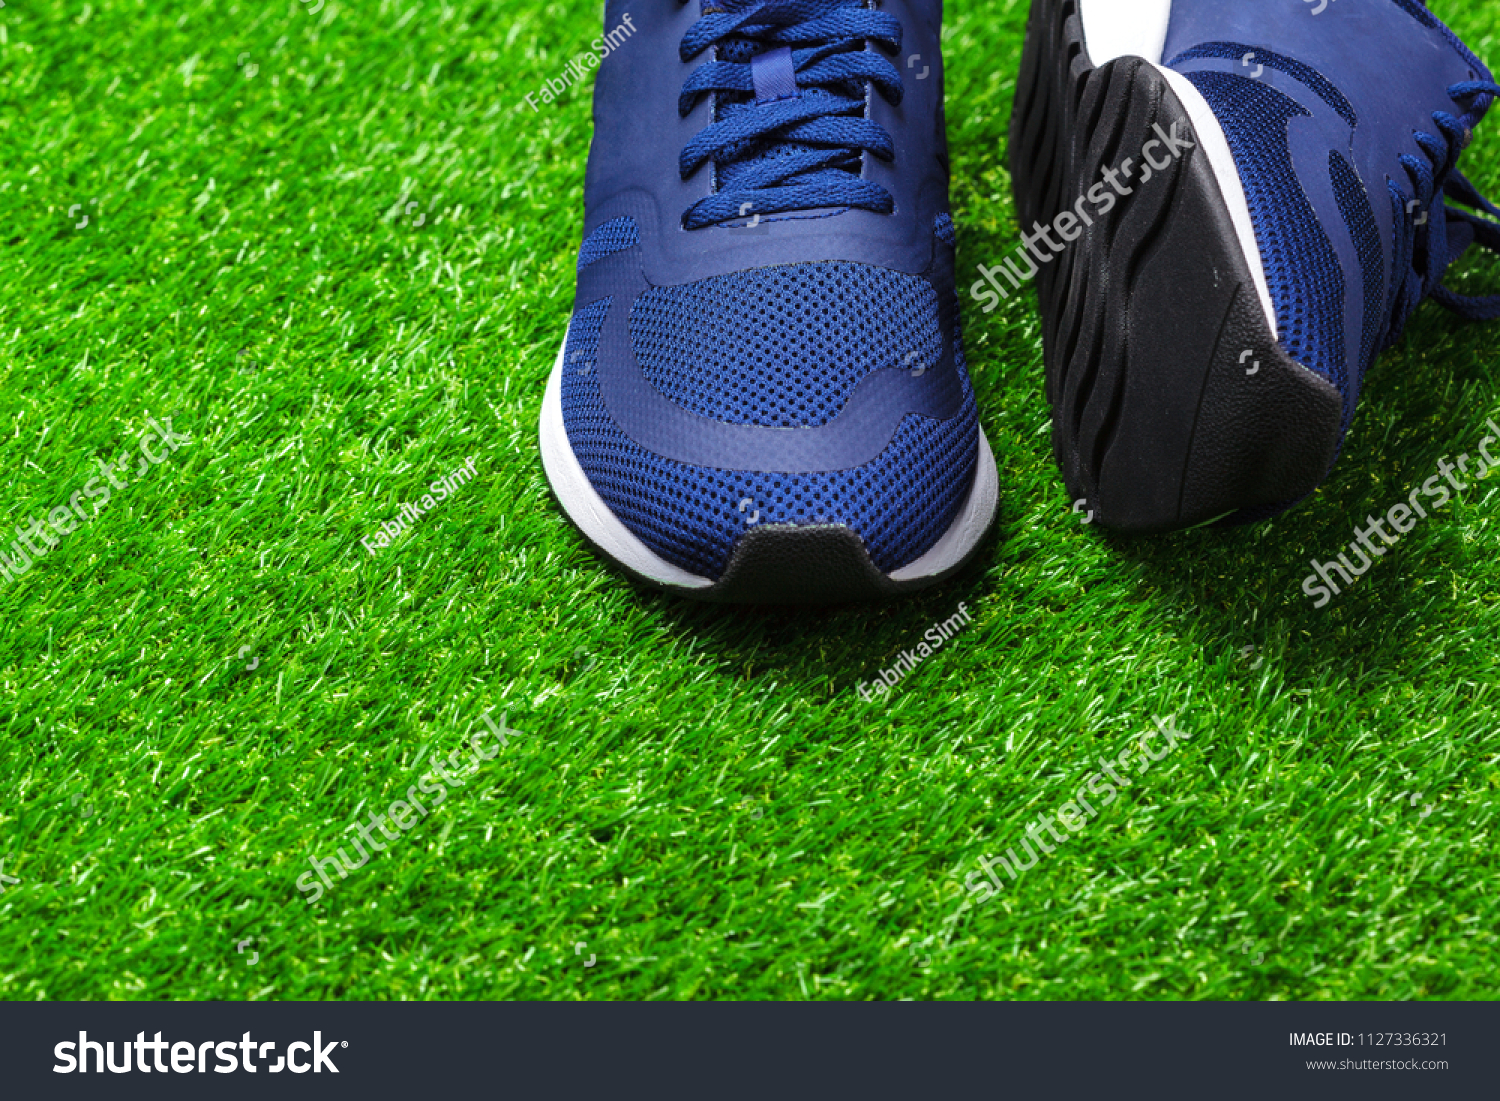 Sport shoes on grass #1127336321